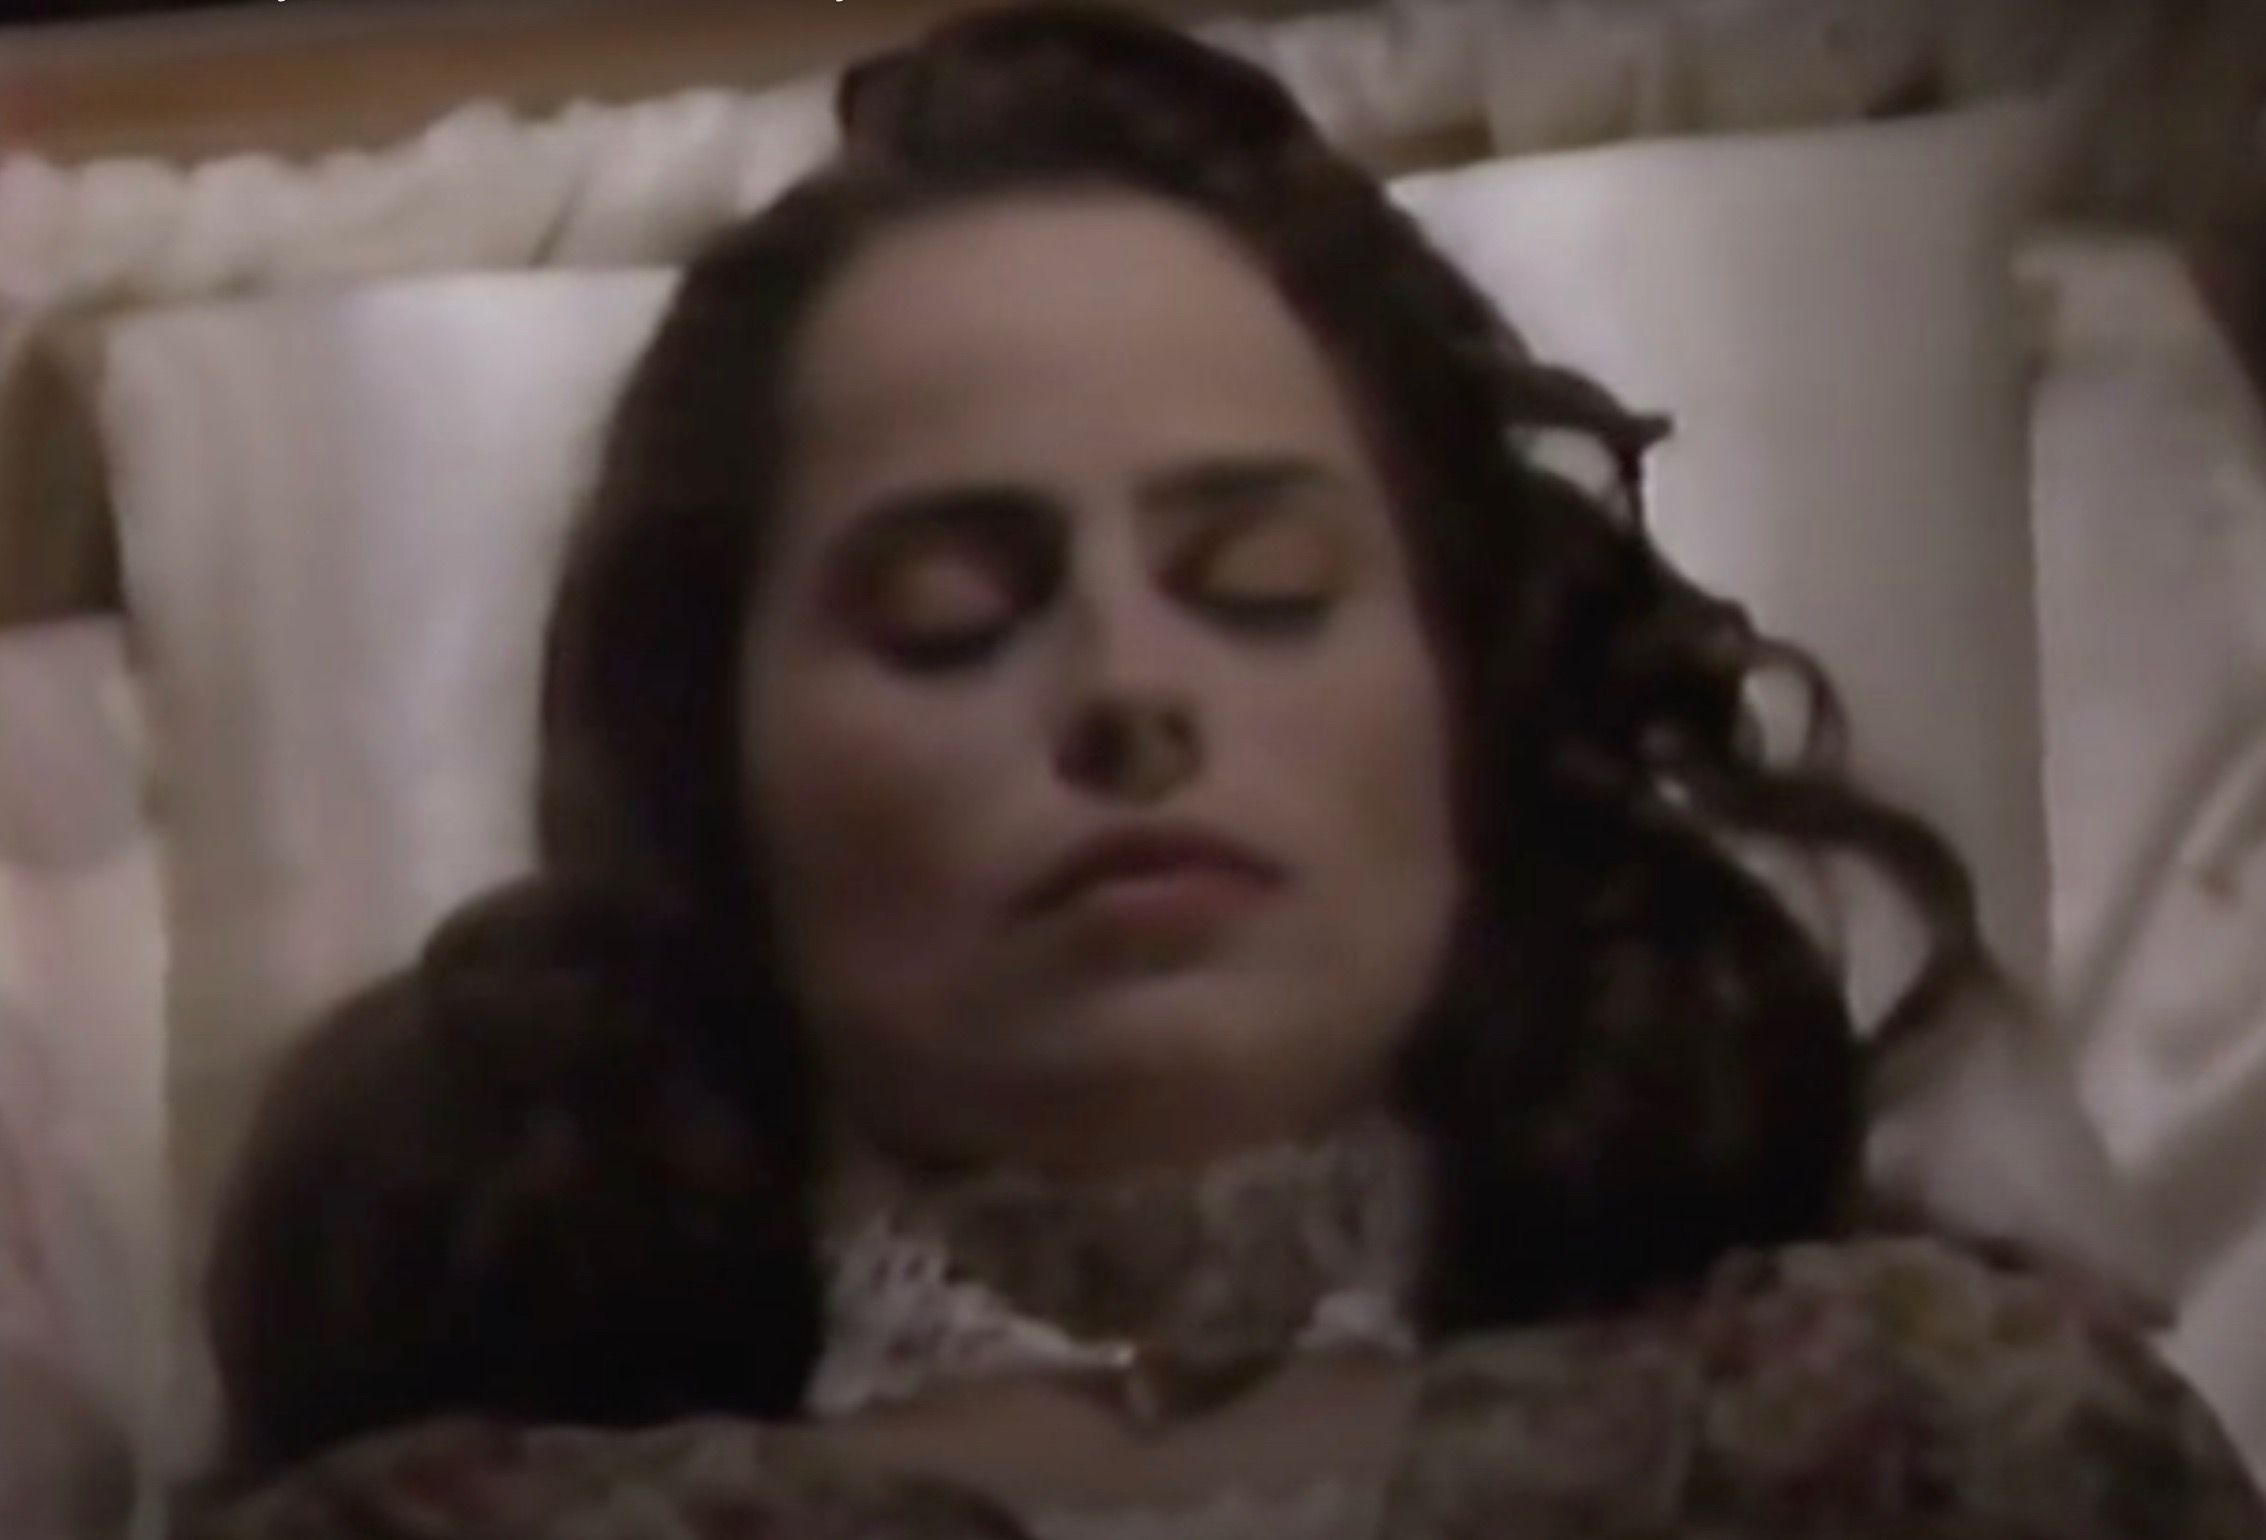 Carly pretending to be dead in a casket in Days Of Our Lives.